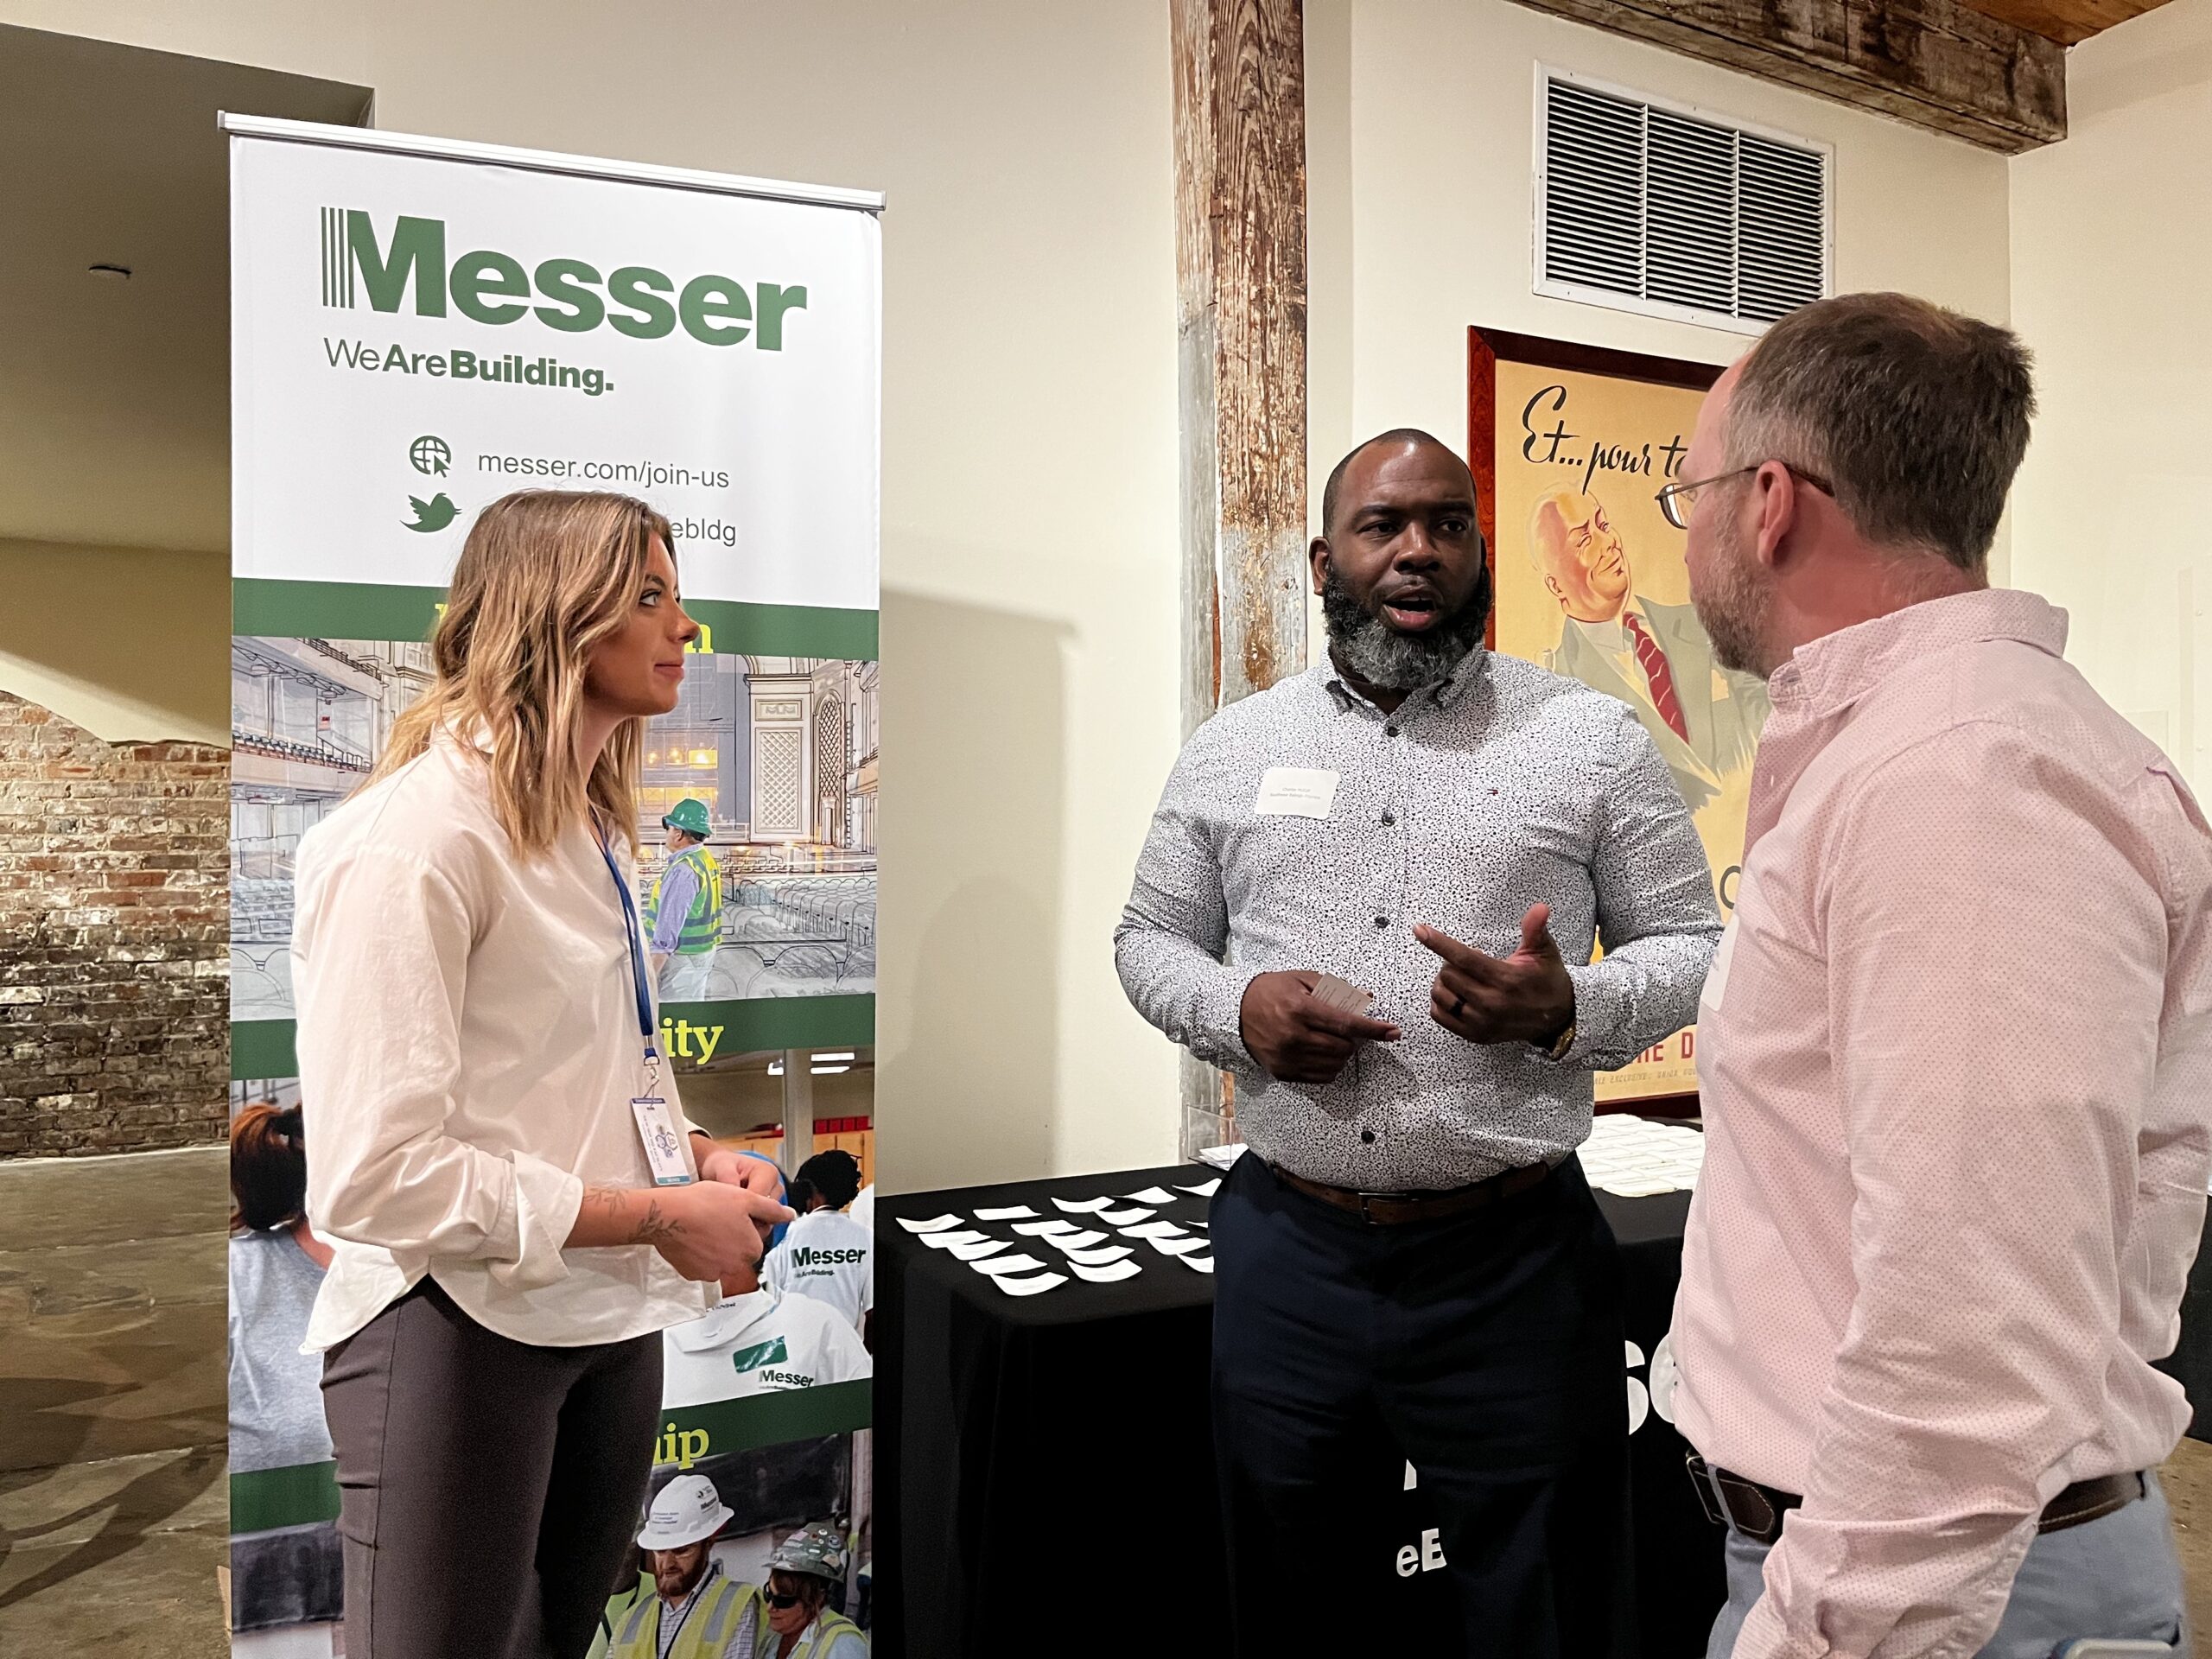 Two Messer Construction Company employees speaking with a business partner at an event.